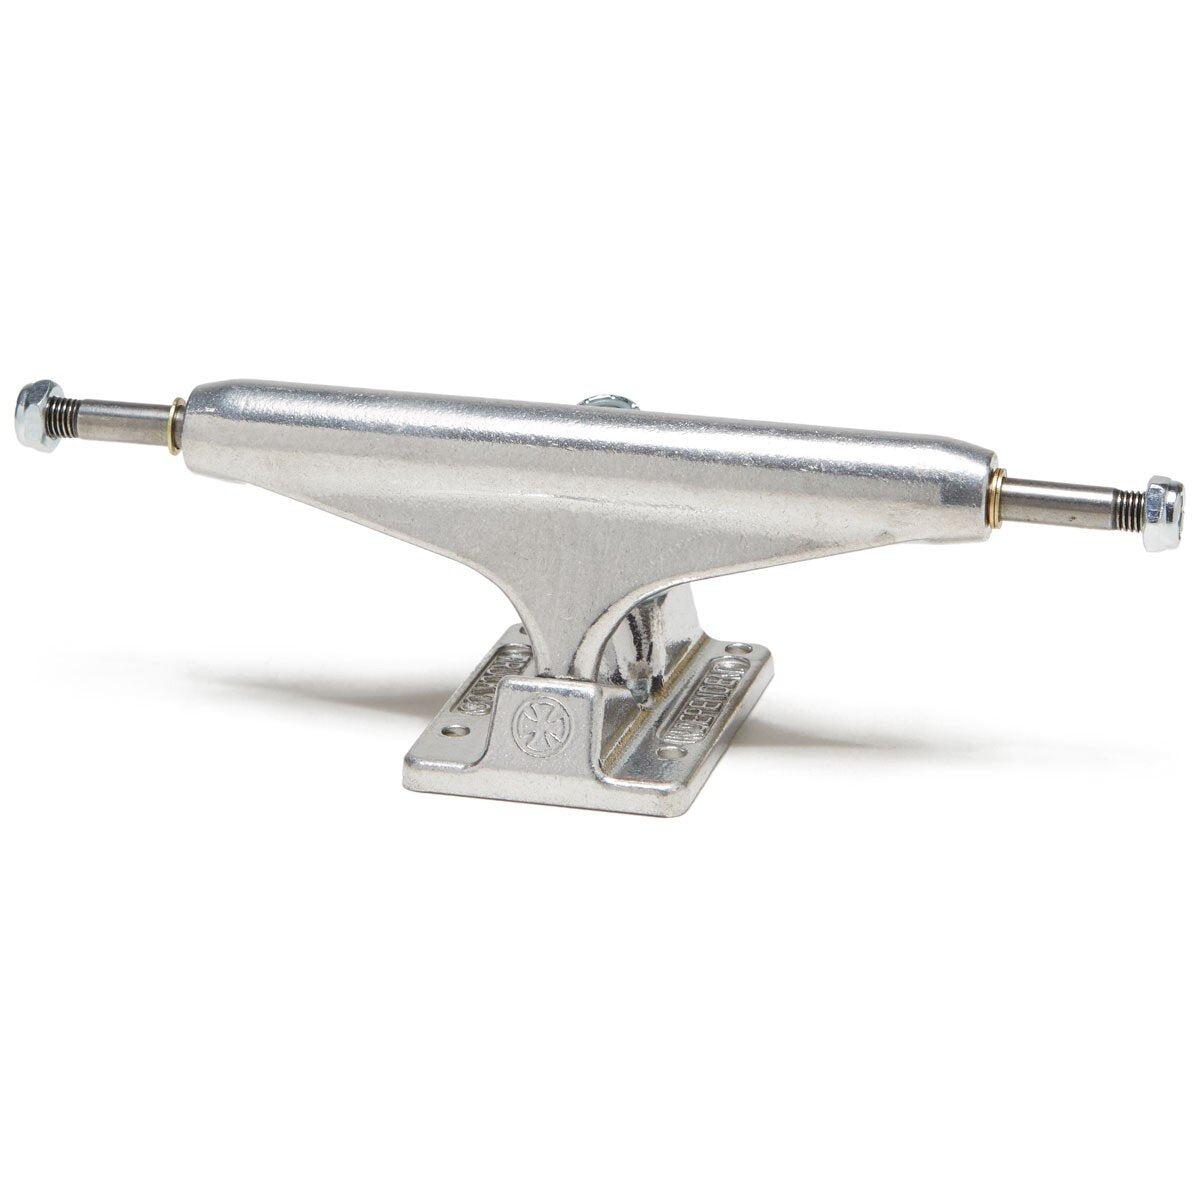 Independent Trucks "Hollow Standard- Silver-Silver" Assorted Sized Truck